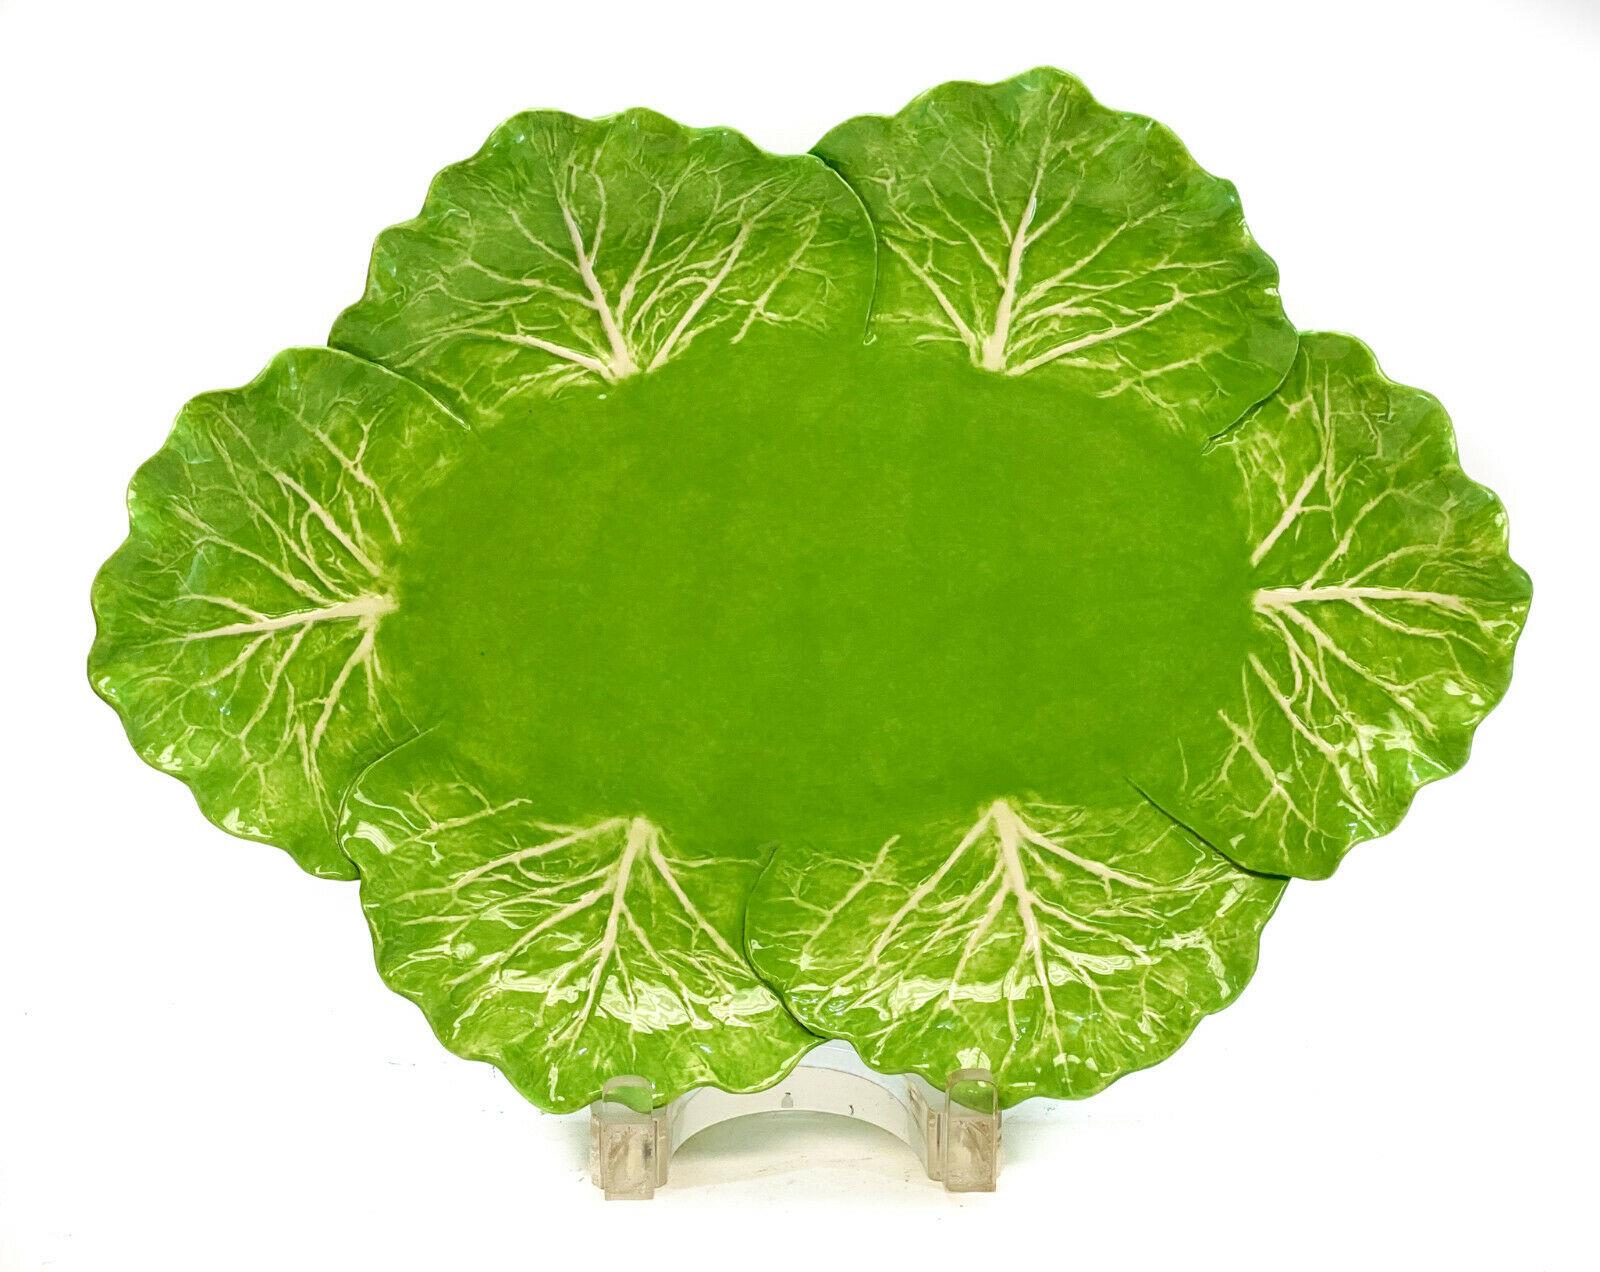 Dodie Thayer Jupiter lettuce leaf handmade earthenware tray. Dodie Thayer Jupiter marks to the underside. 

Weight Approx., 2 lbs

Measures Approx., 14.125 inches x 9.75 inches x 1.75 inches.